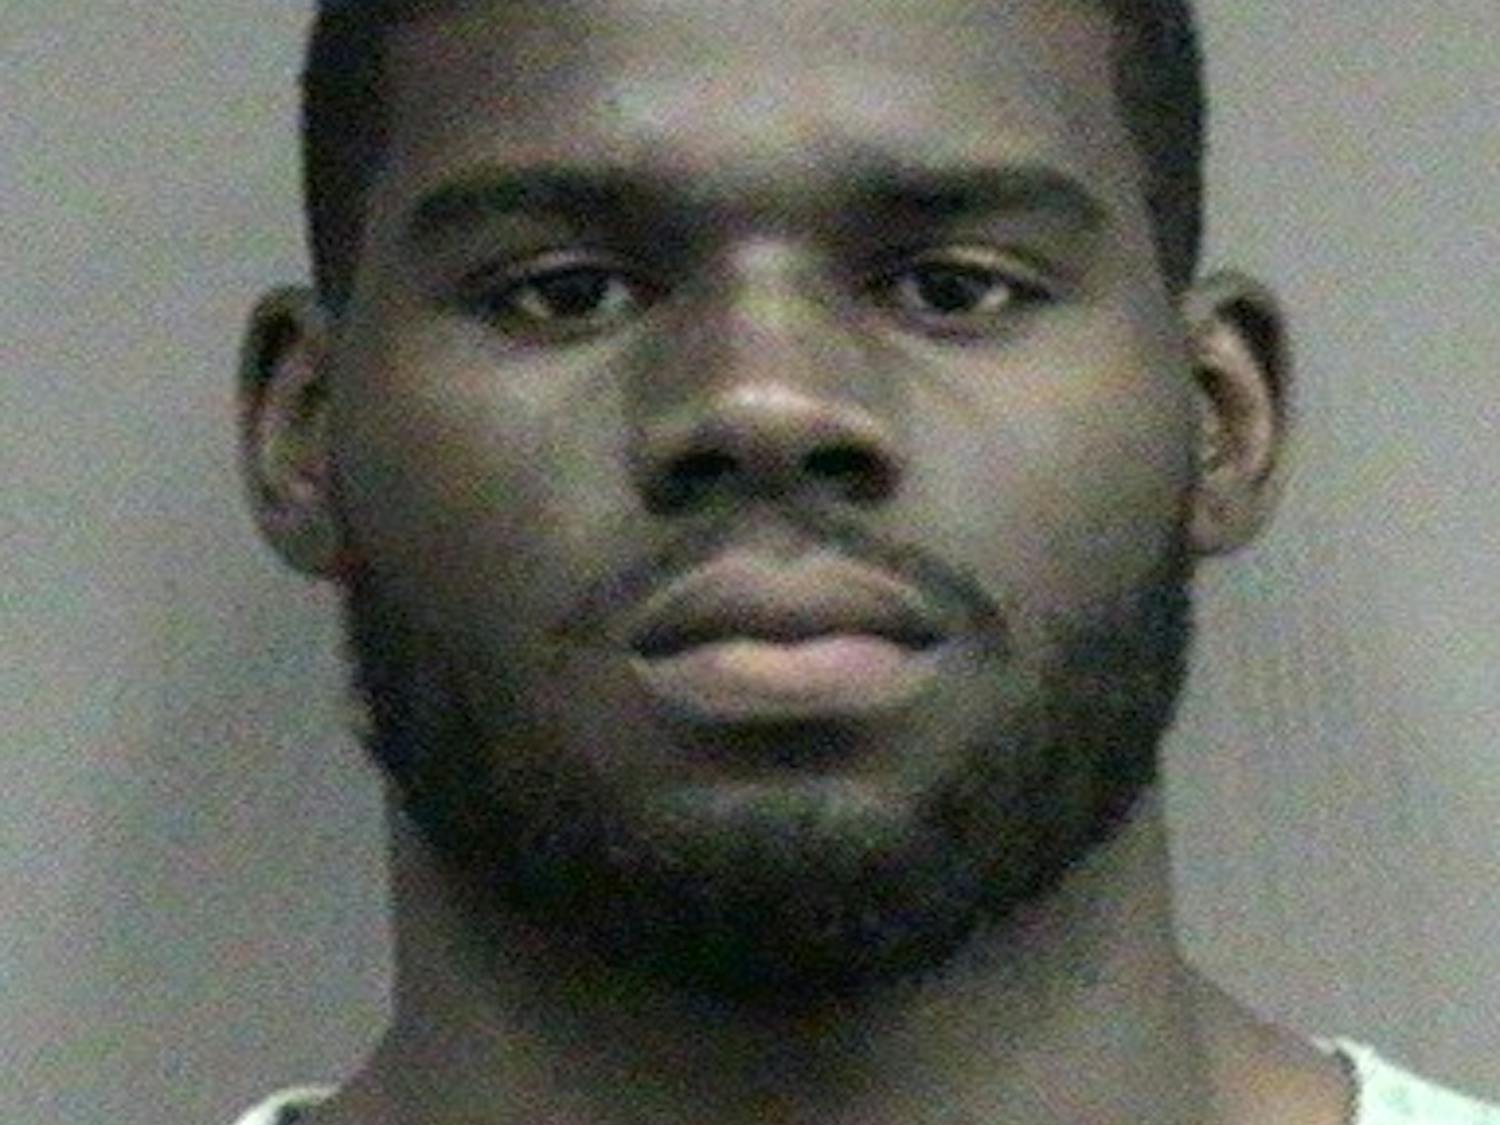 Gators freshman tight end A.C. Leonard was arrested Wednesday night for domestic battery.